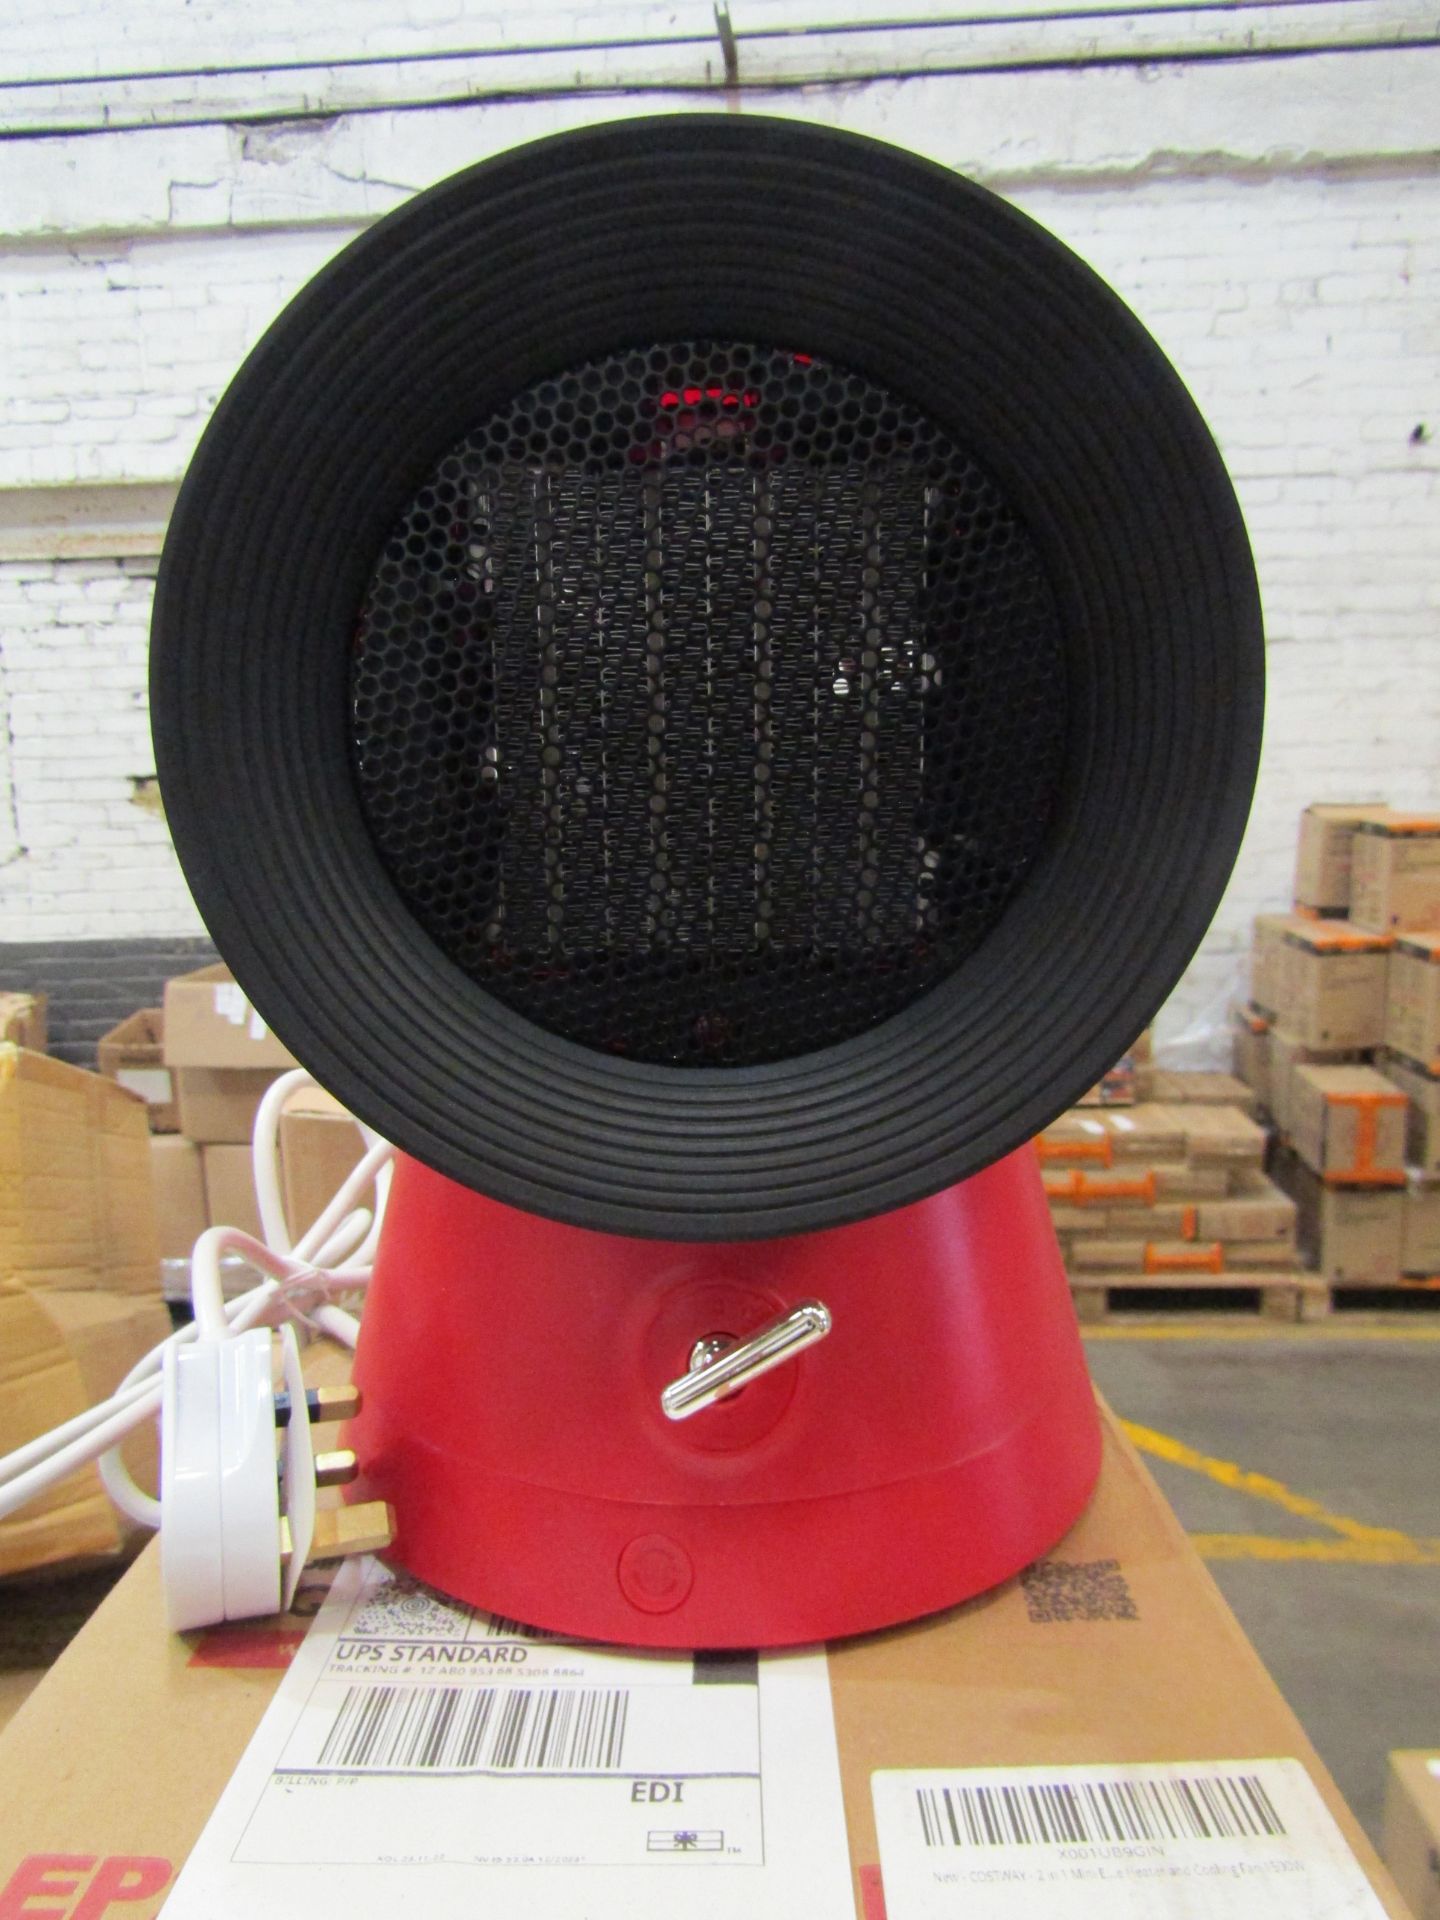 Costway Portable Fan Heater, Good Condition & Boxed.